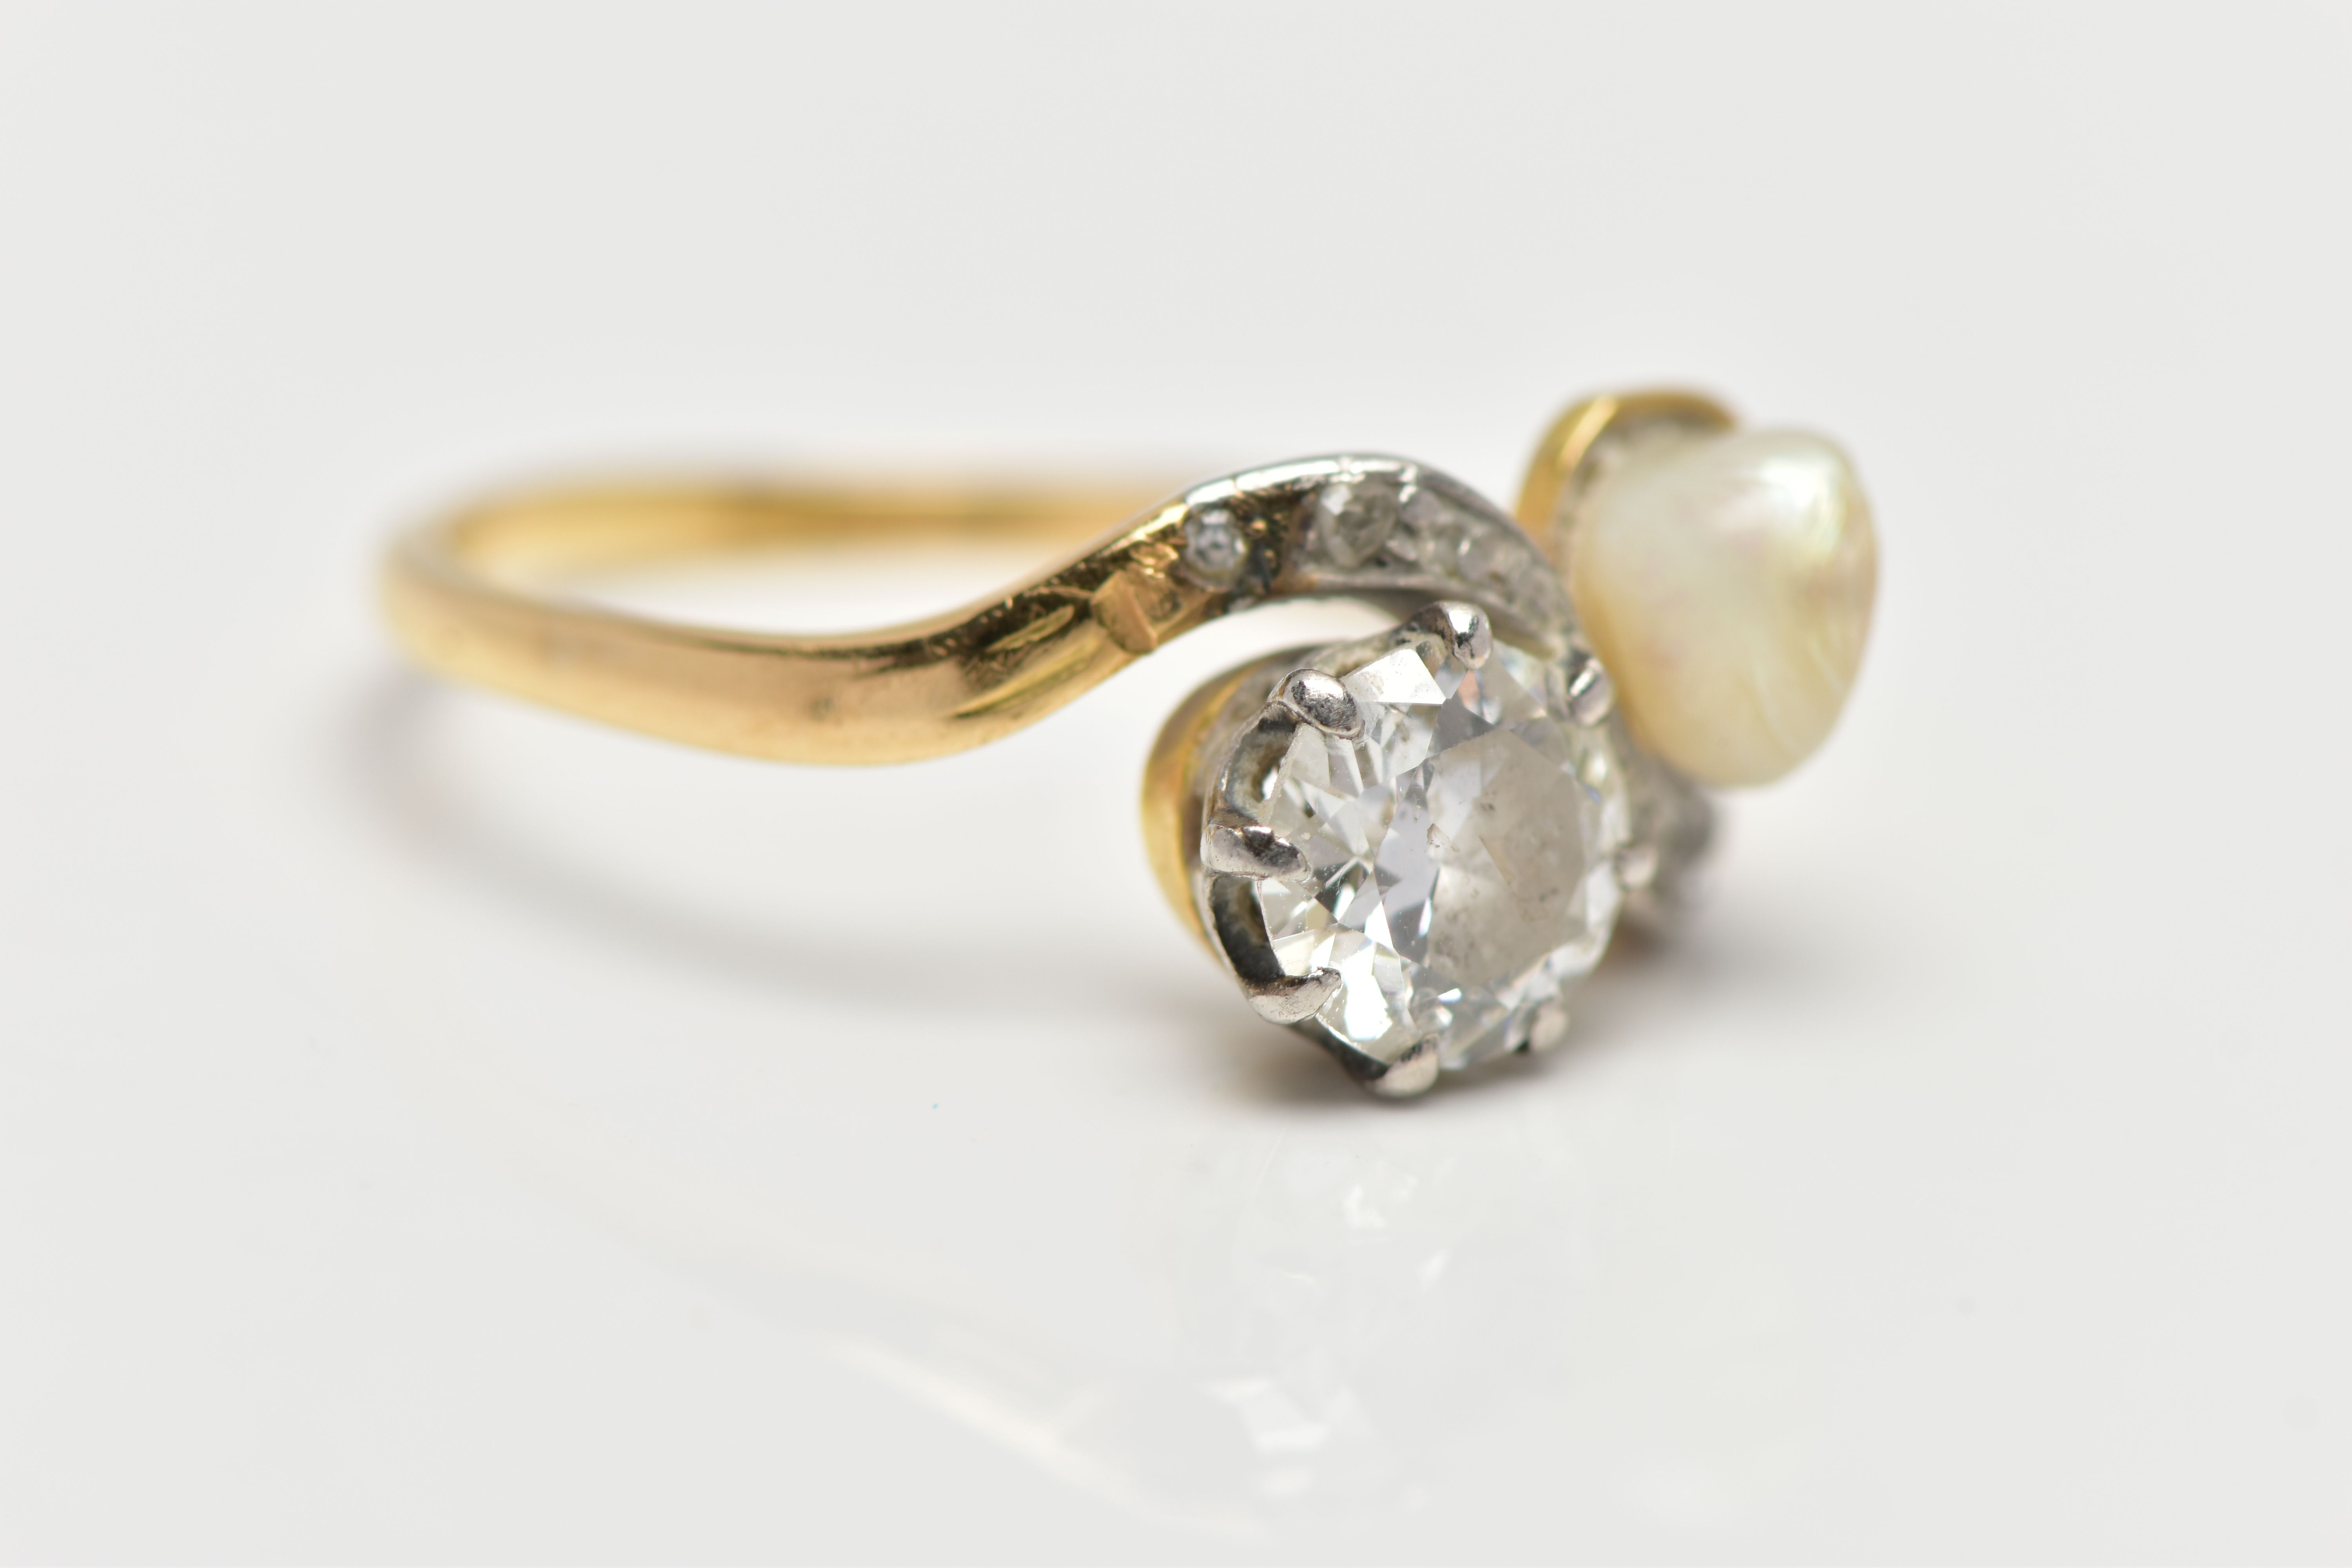 AN EARLY 20TH CENTURY 18CT GOLD DIAMOND AND PEARL DRESS RING, of crossover design, set with an early - Image 8 of 8